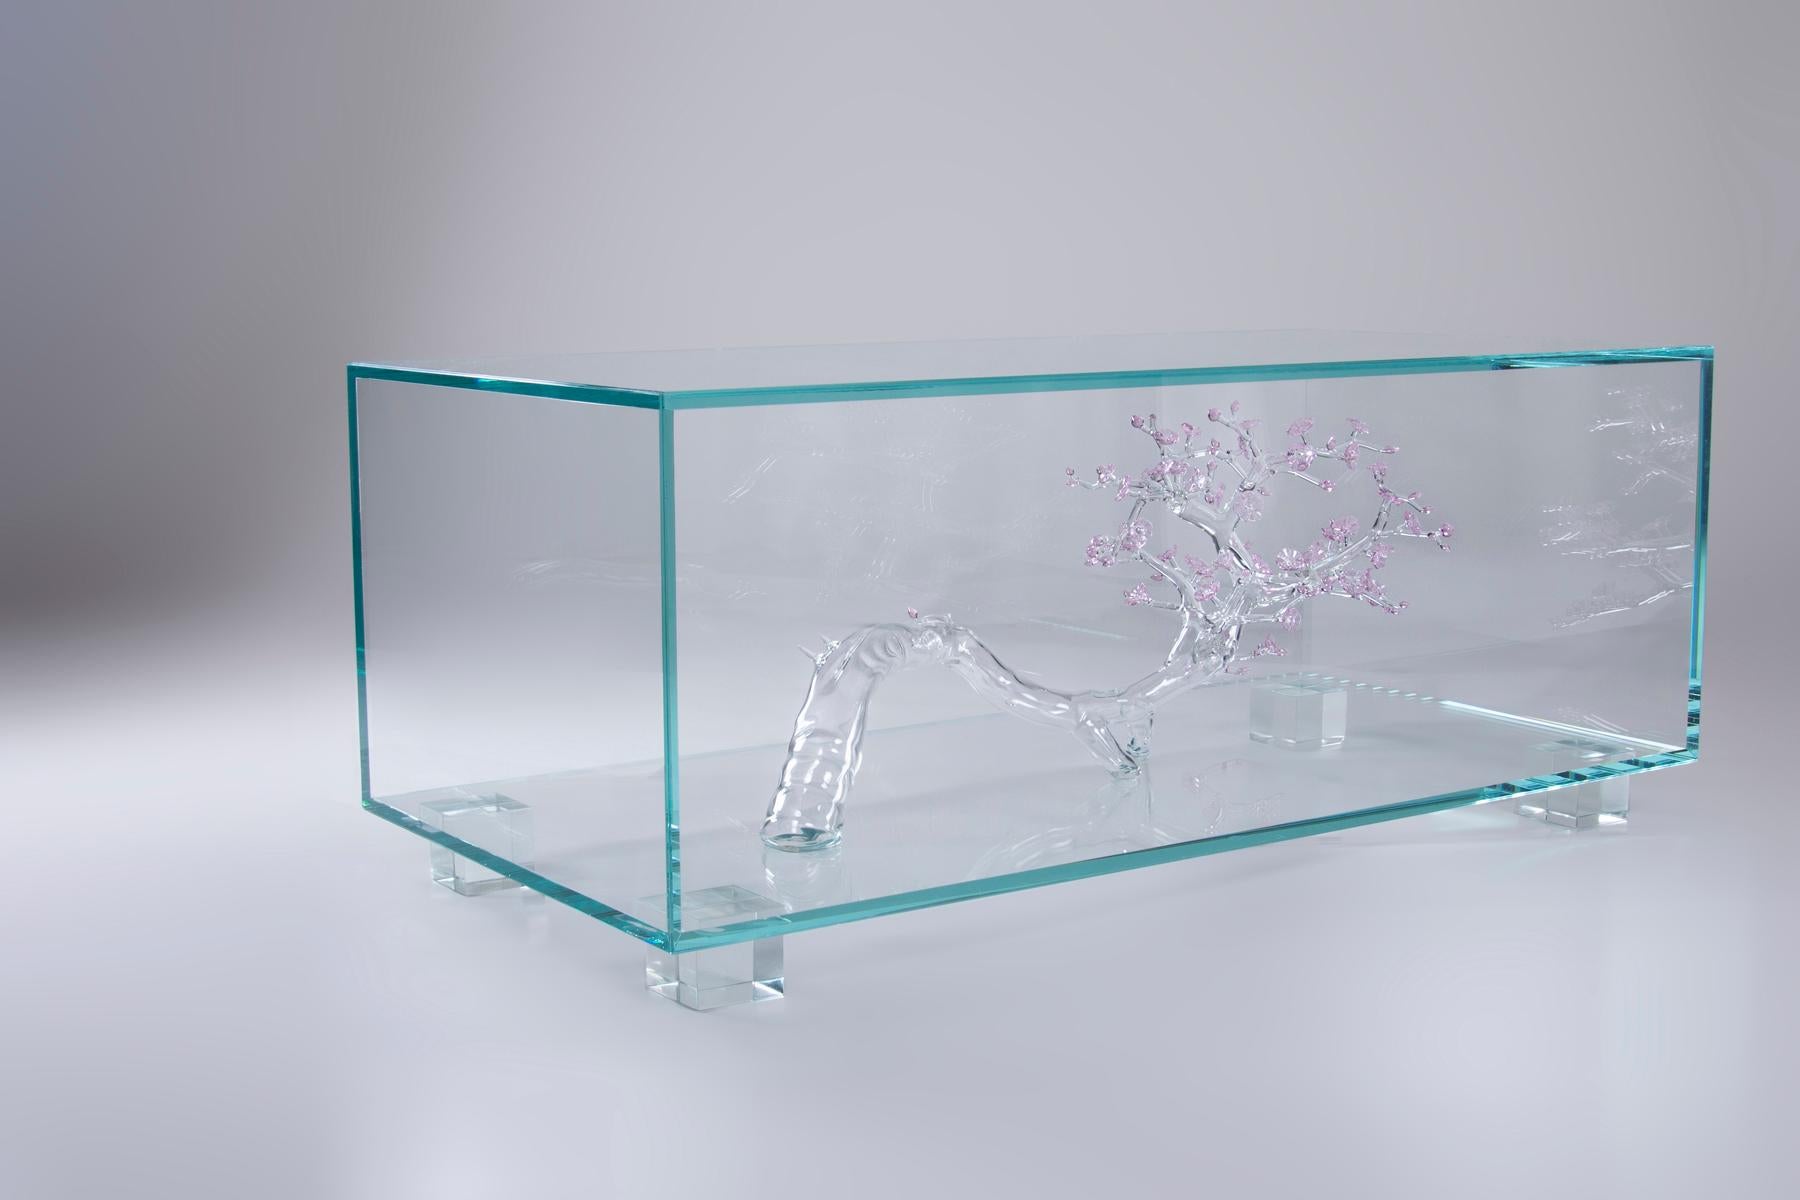 This table presents the form of the tree, desolate and enclosed in thick glass. Duetto delights in shaping nature into poetry to be contemplated within the home.


Duetto is a suite of decorative art objects manifested in collaboration by two